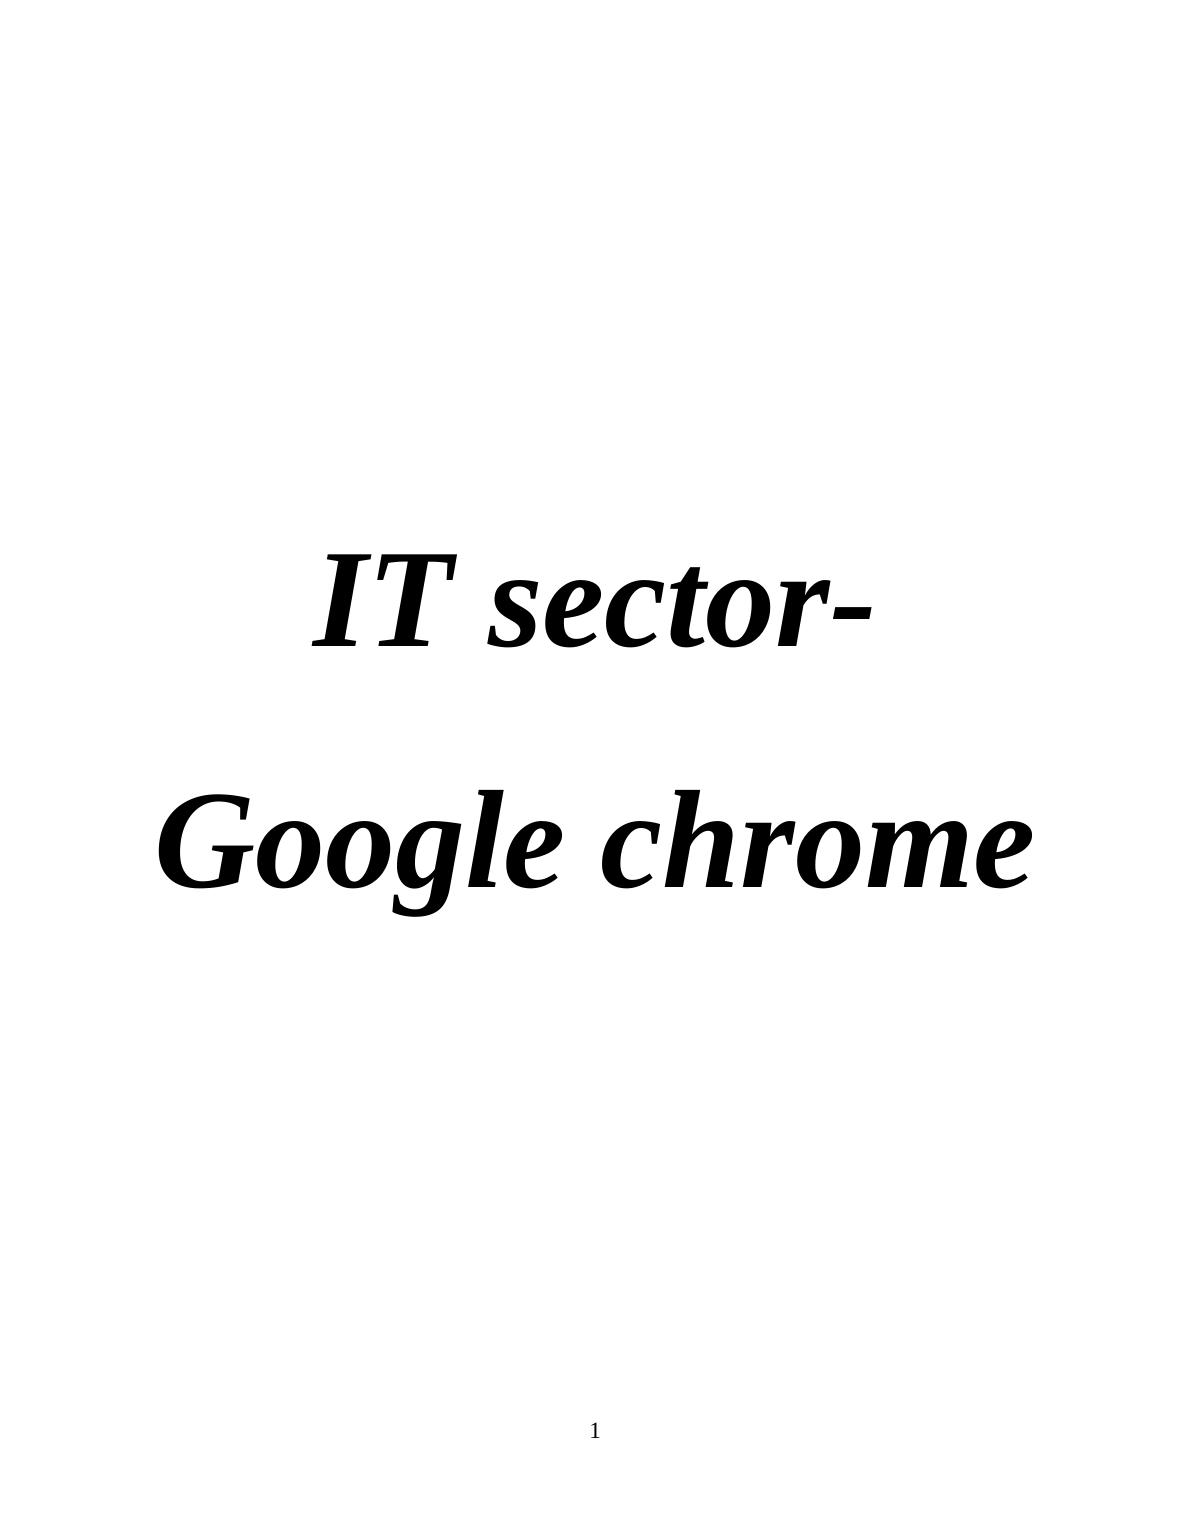 Impact of Cloud Computing on IT Sector and Recommendations for Google Chrome_1